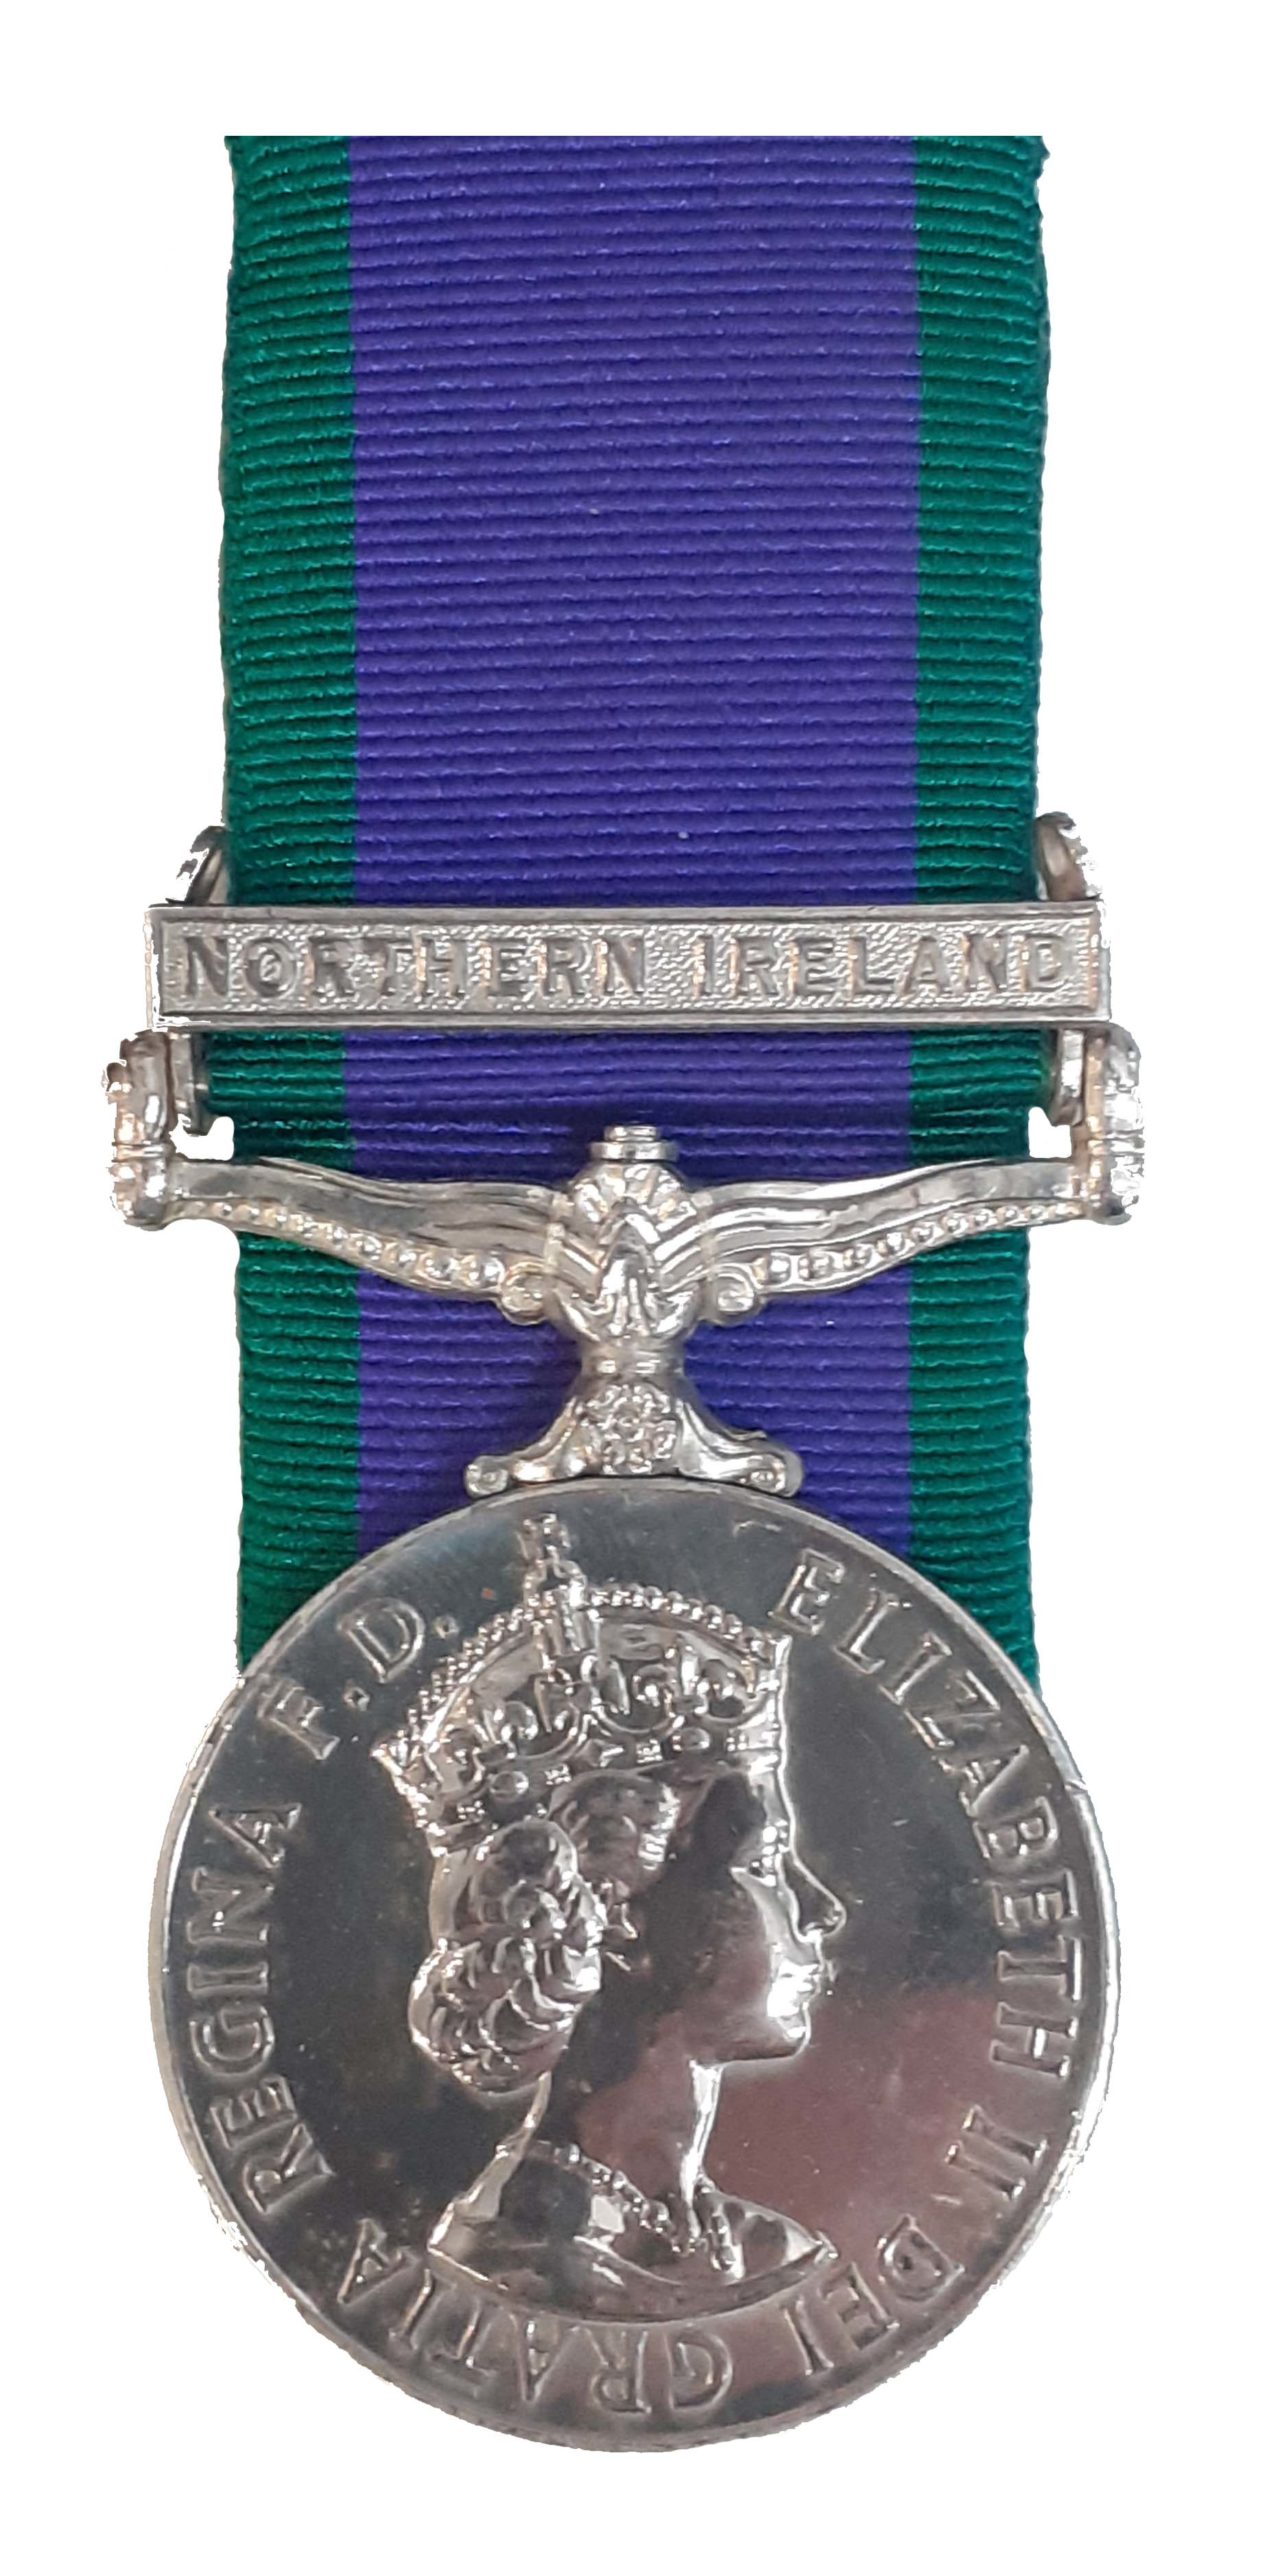 General service Medal, 1962-2007, one clasp, Northern Ireland to Fusilier P.D.J. Himpfen